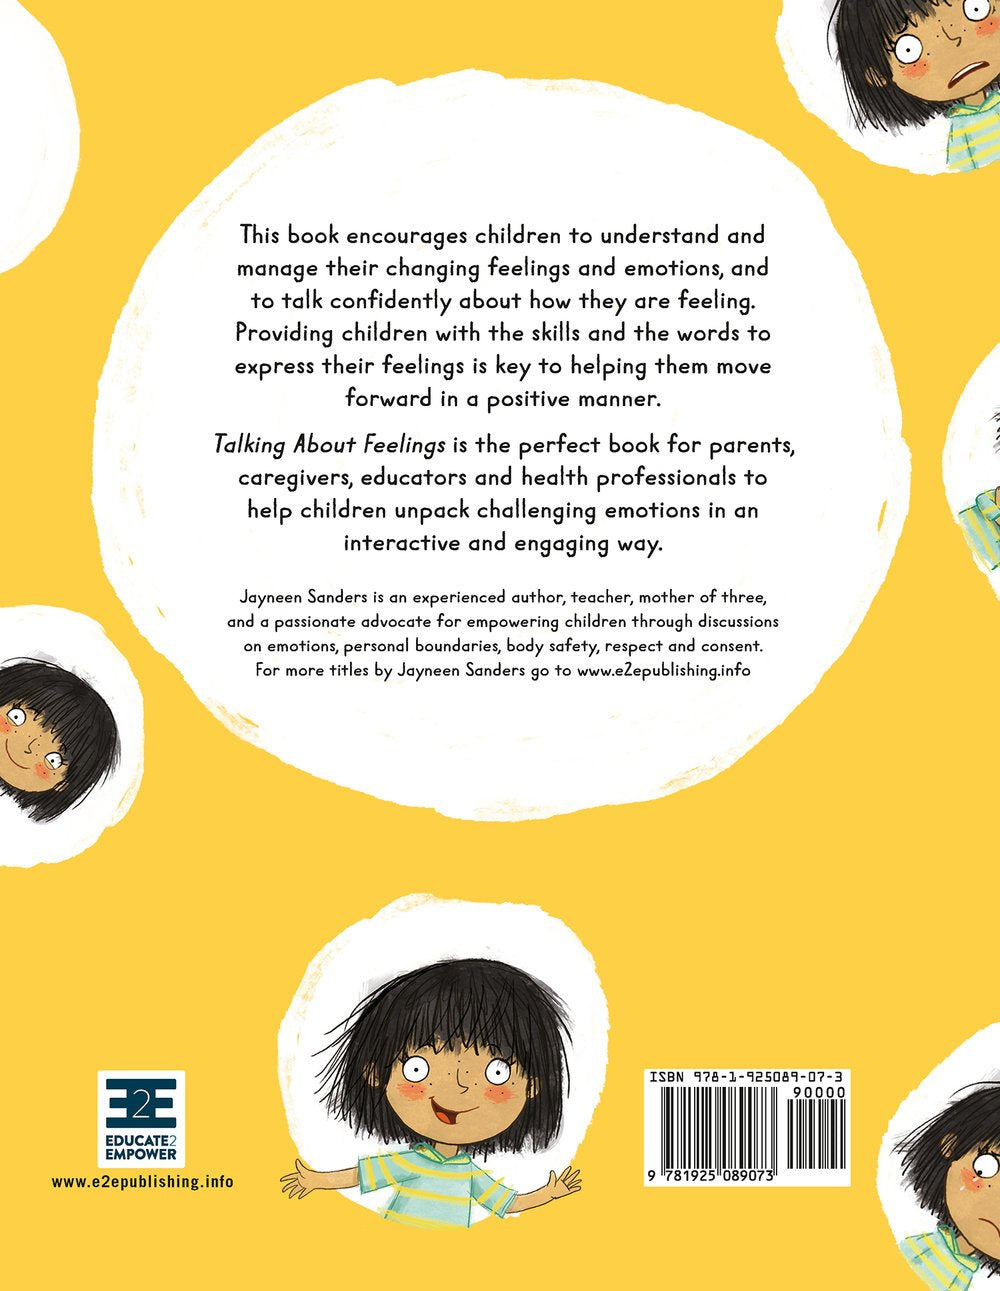 The back cover of the book ‘Talking About Feelings’ by Jayneen Sanders.